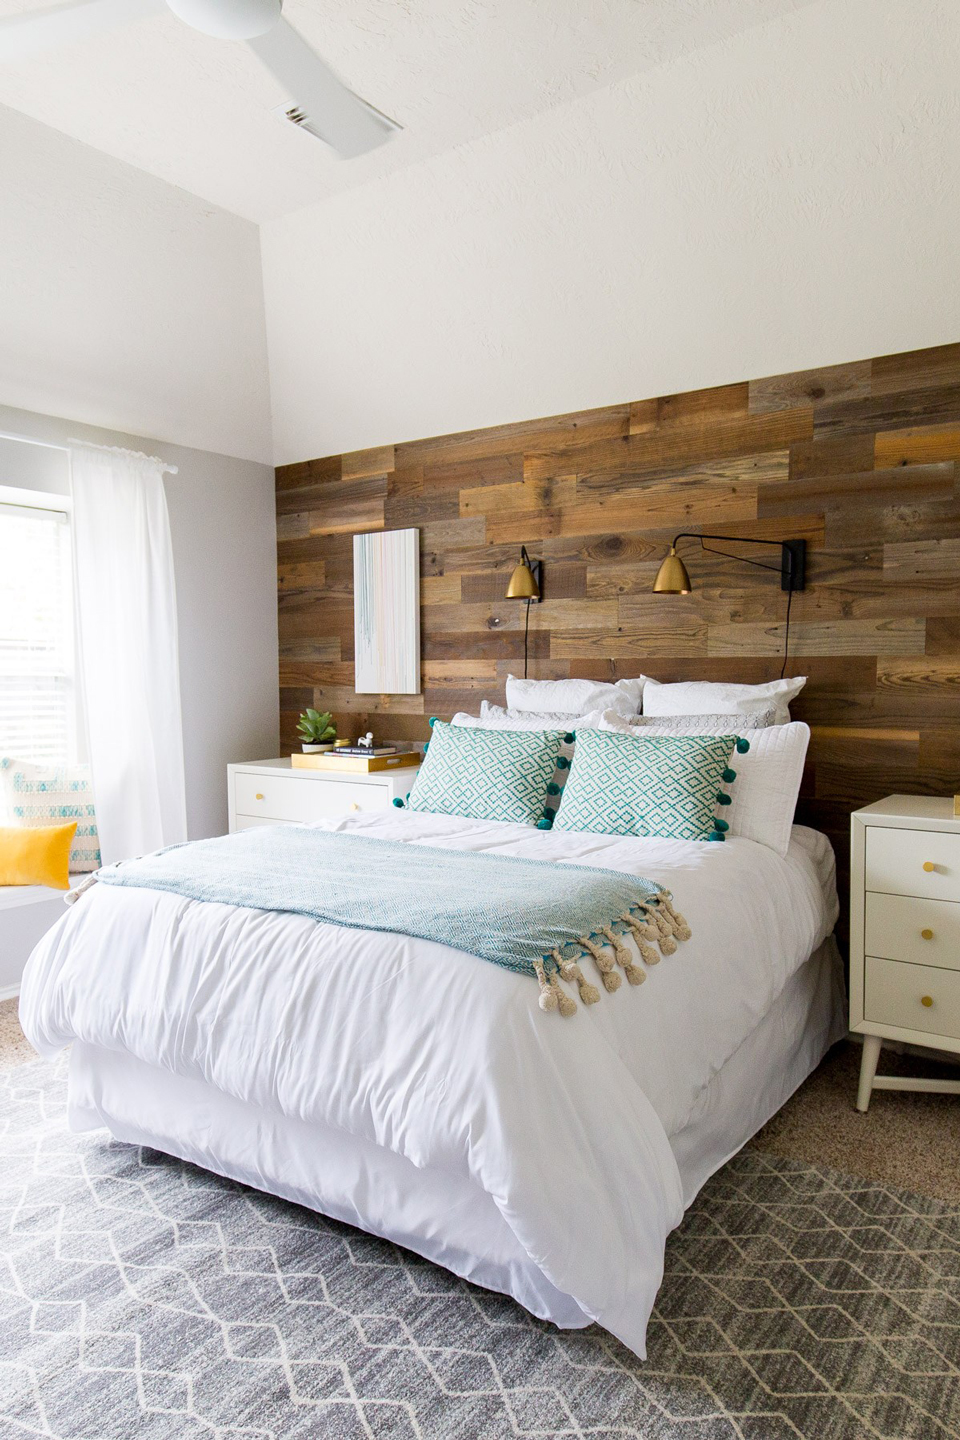 An after image a of a bright bedroom with DIY wood panel